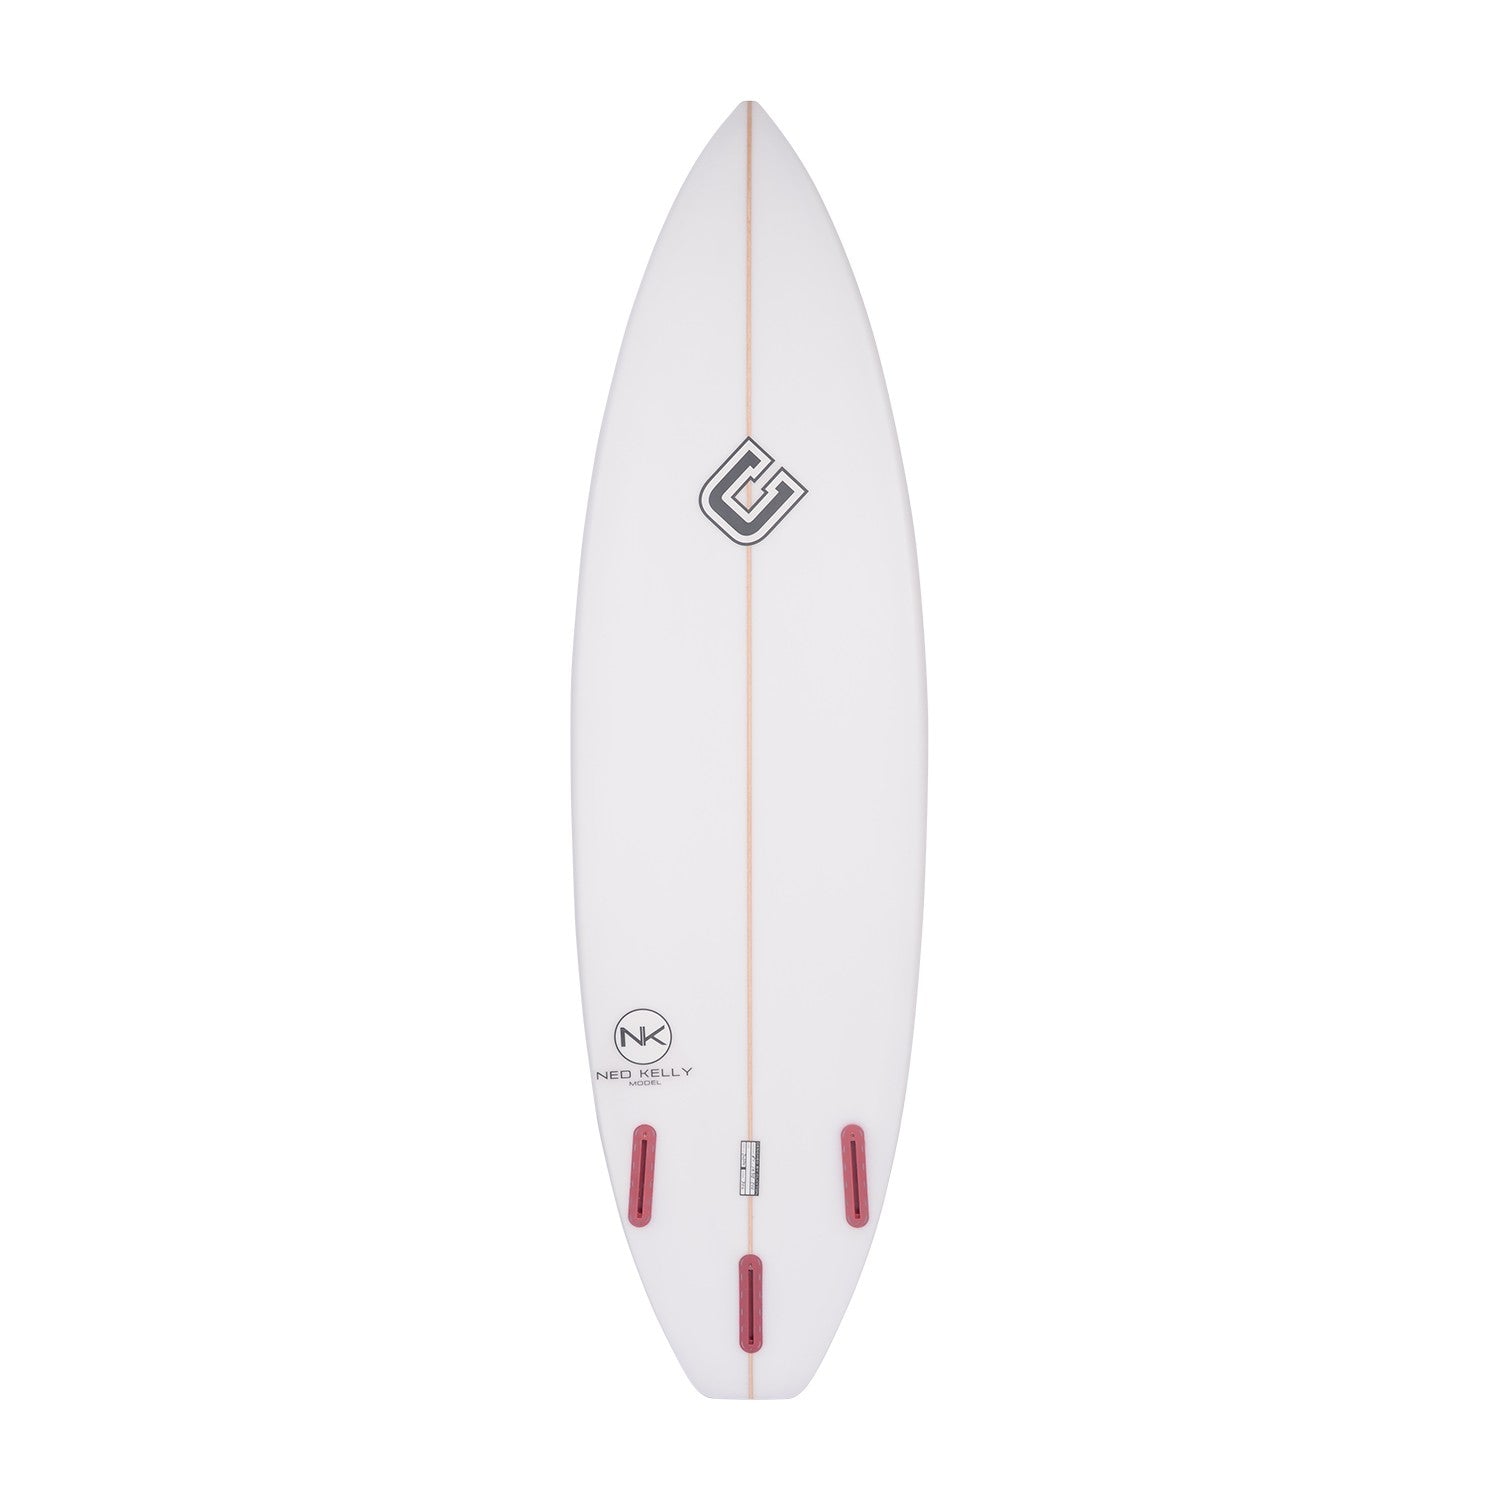 CLAYTON Surfboards - Ned Kelly (PU) Futures - 5'10